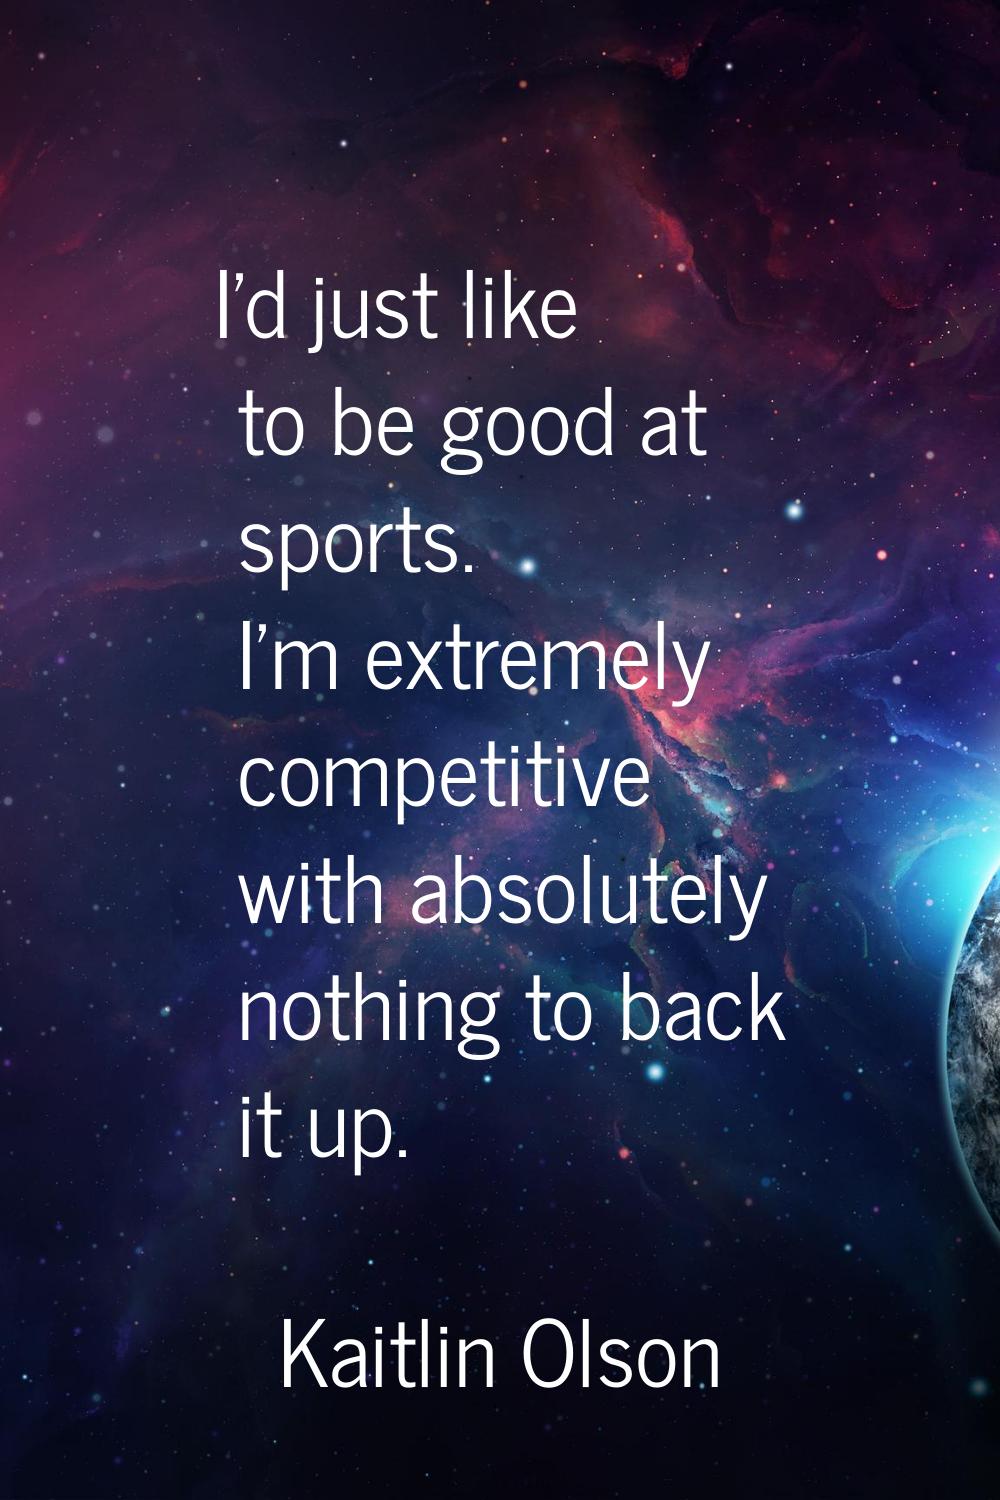 I'd just like to be good at sports. I'm extremely competitive with absolutely nothing to back it up